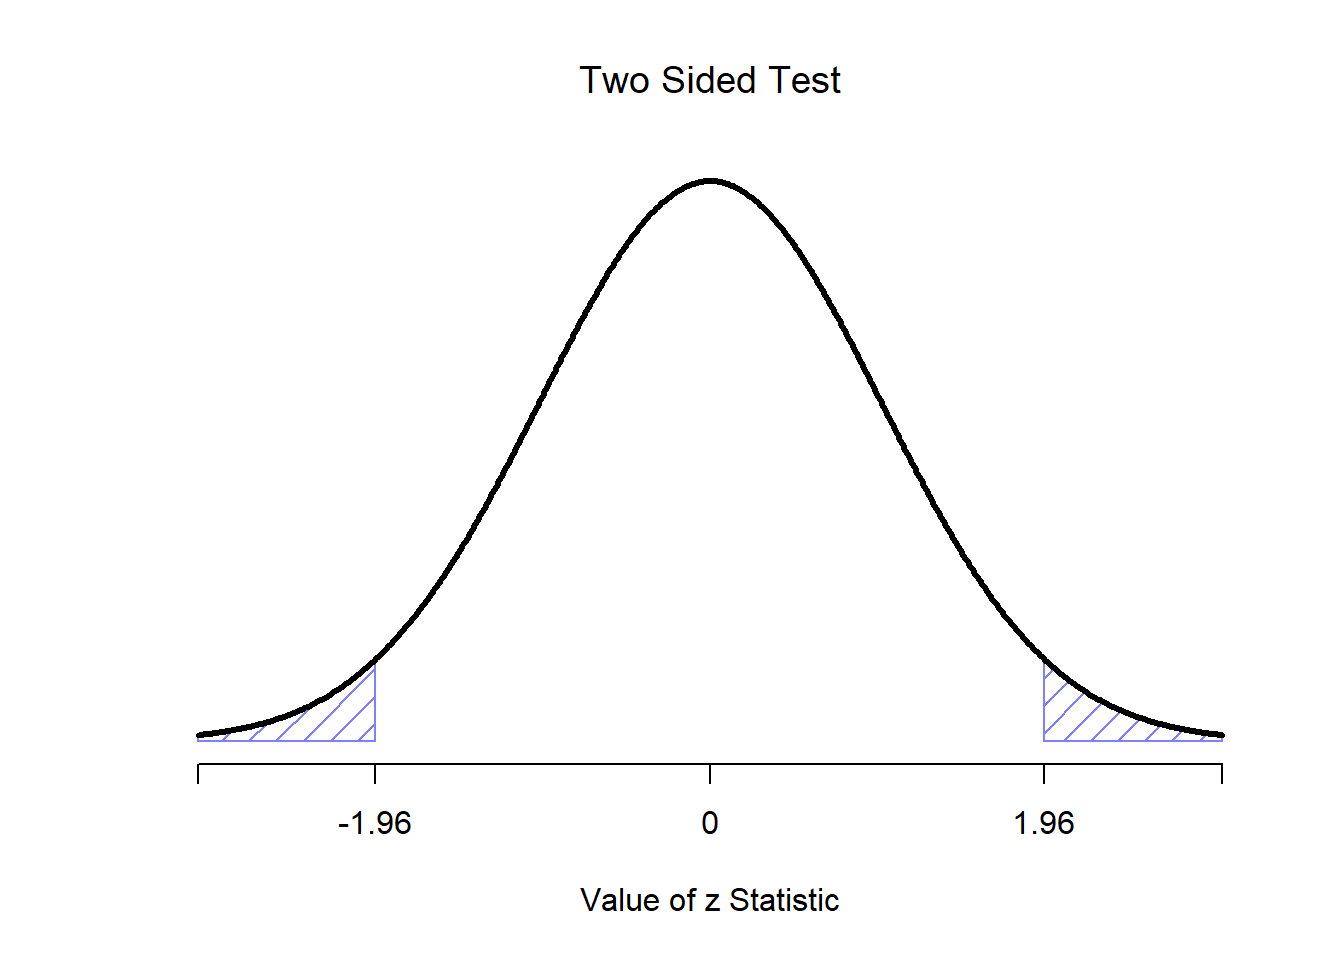 Rejection regions for the two-sided $z$-test